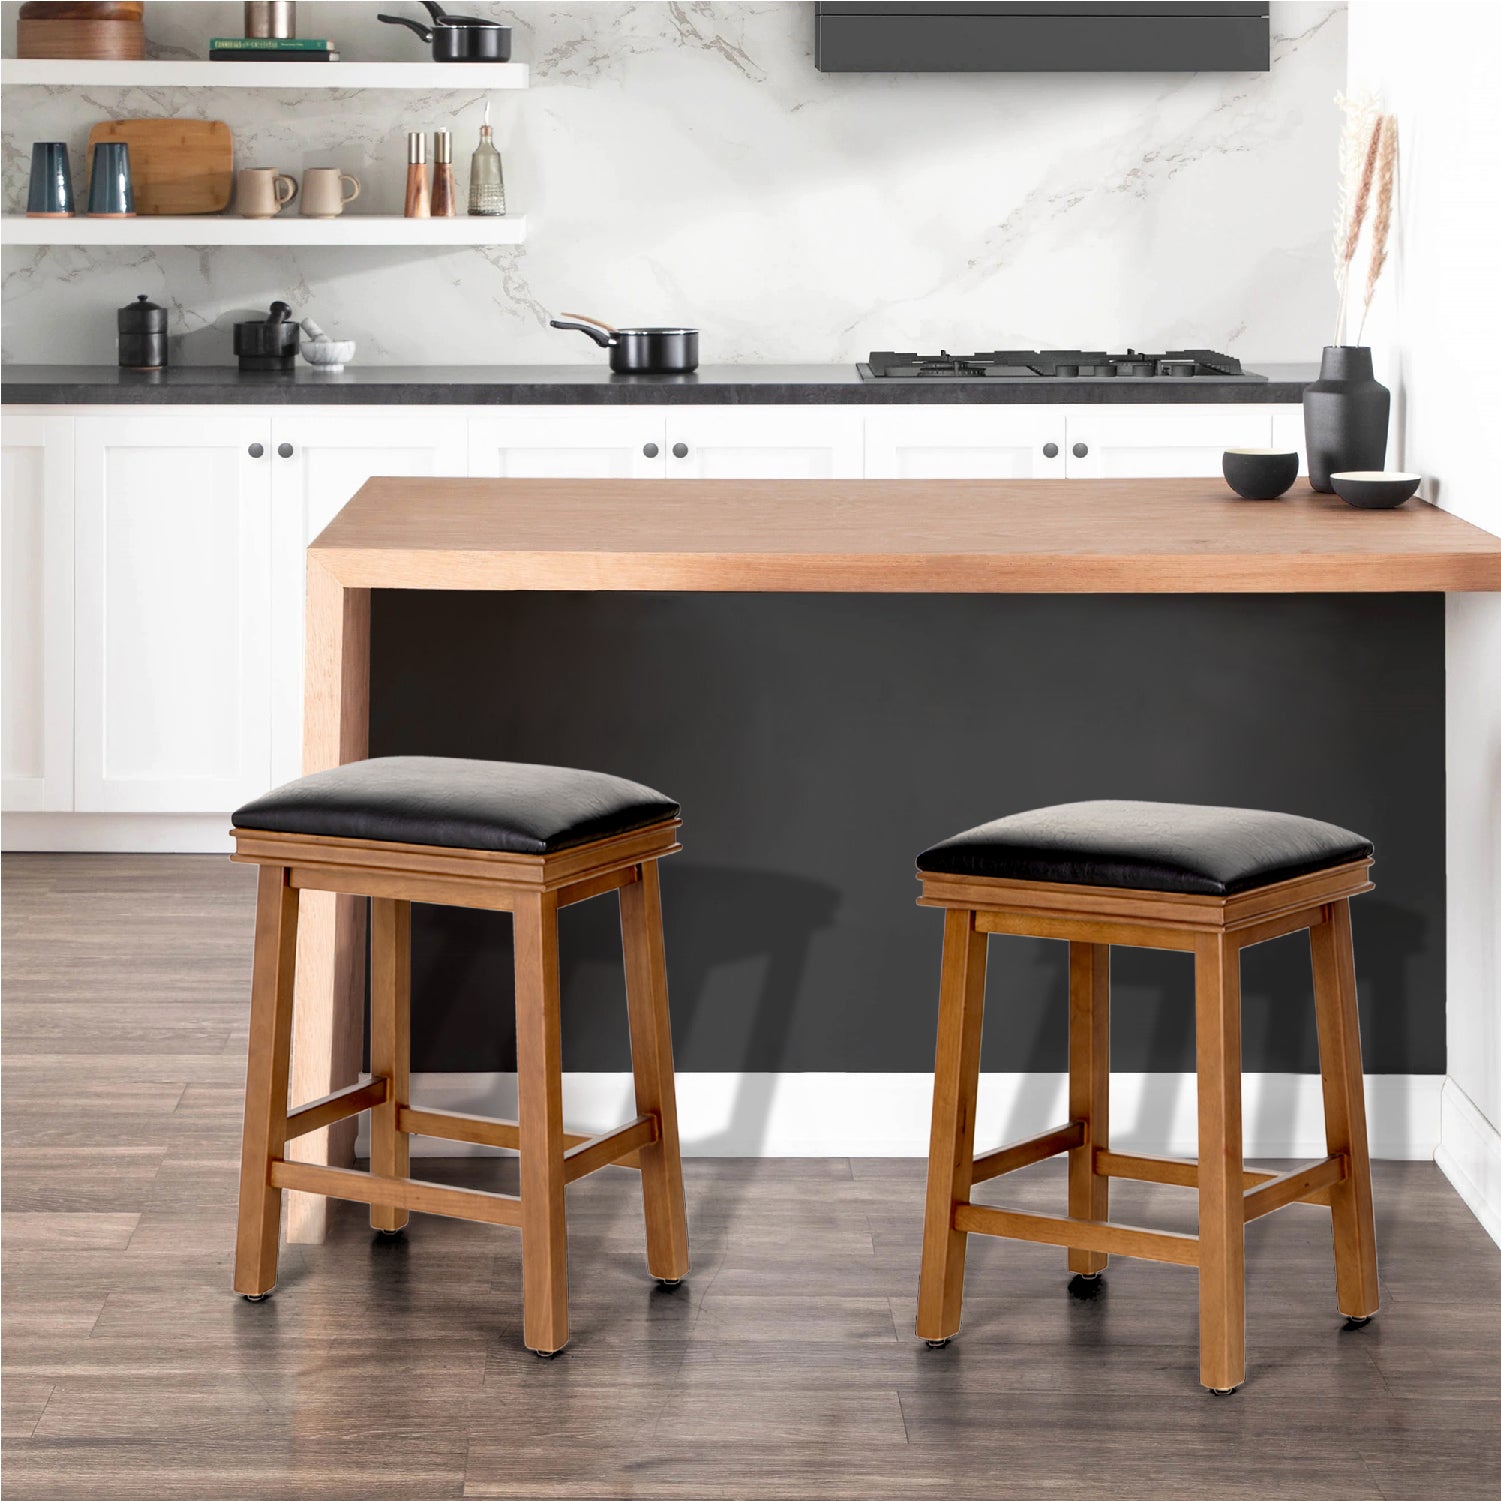 PHI VILLA PU Leather 24" Counter Height Bar Stool with Wood Legs, Set of 2